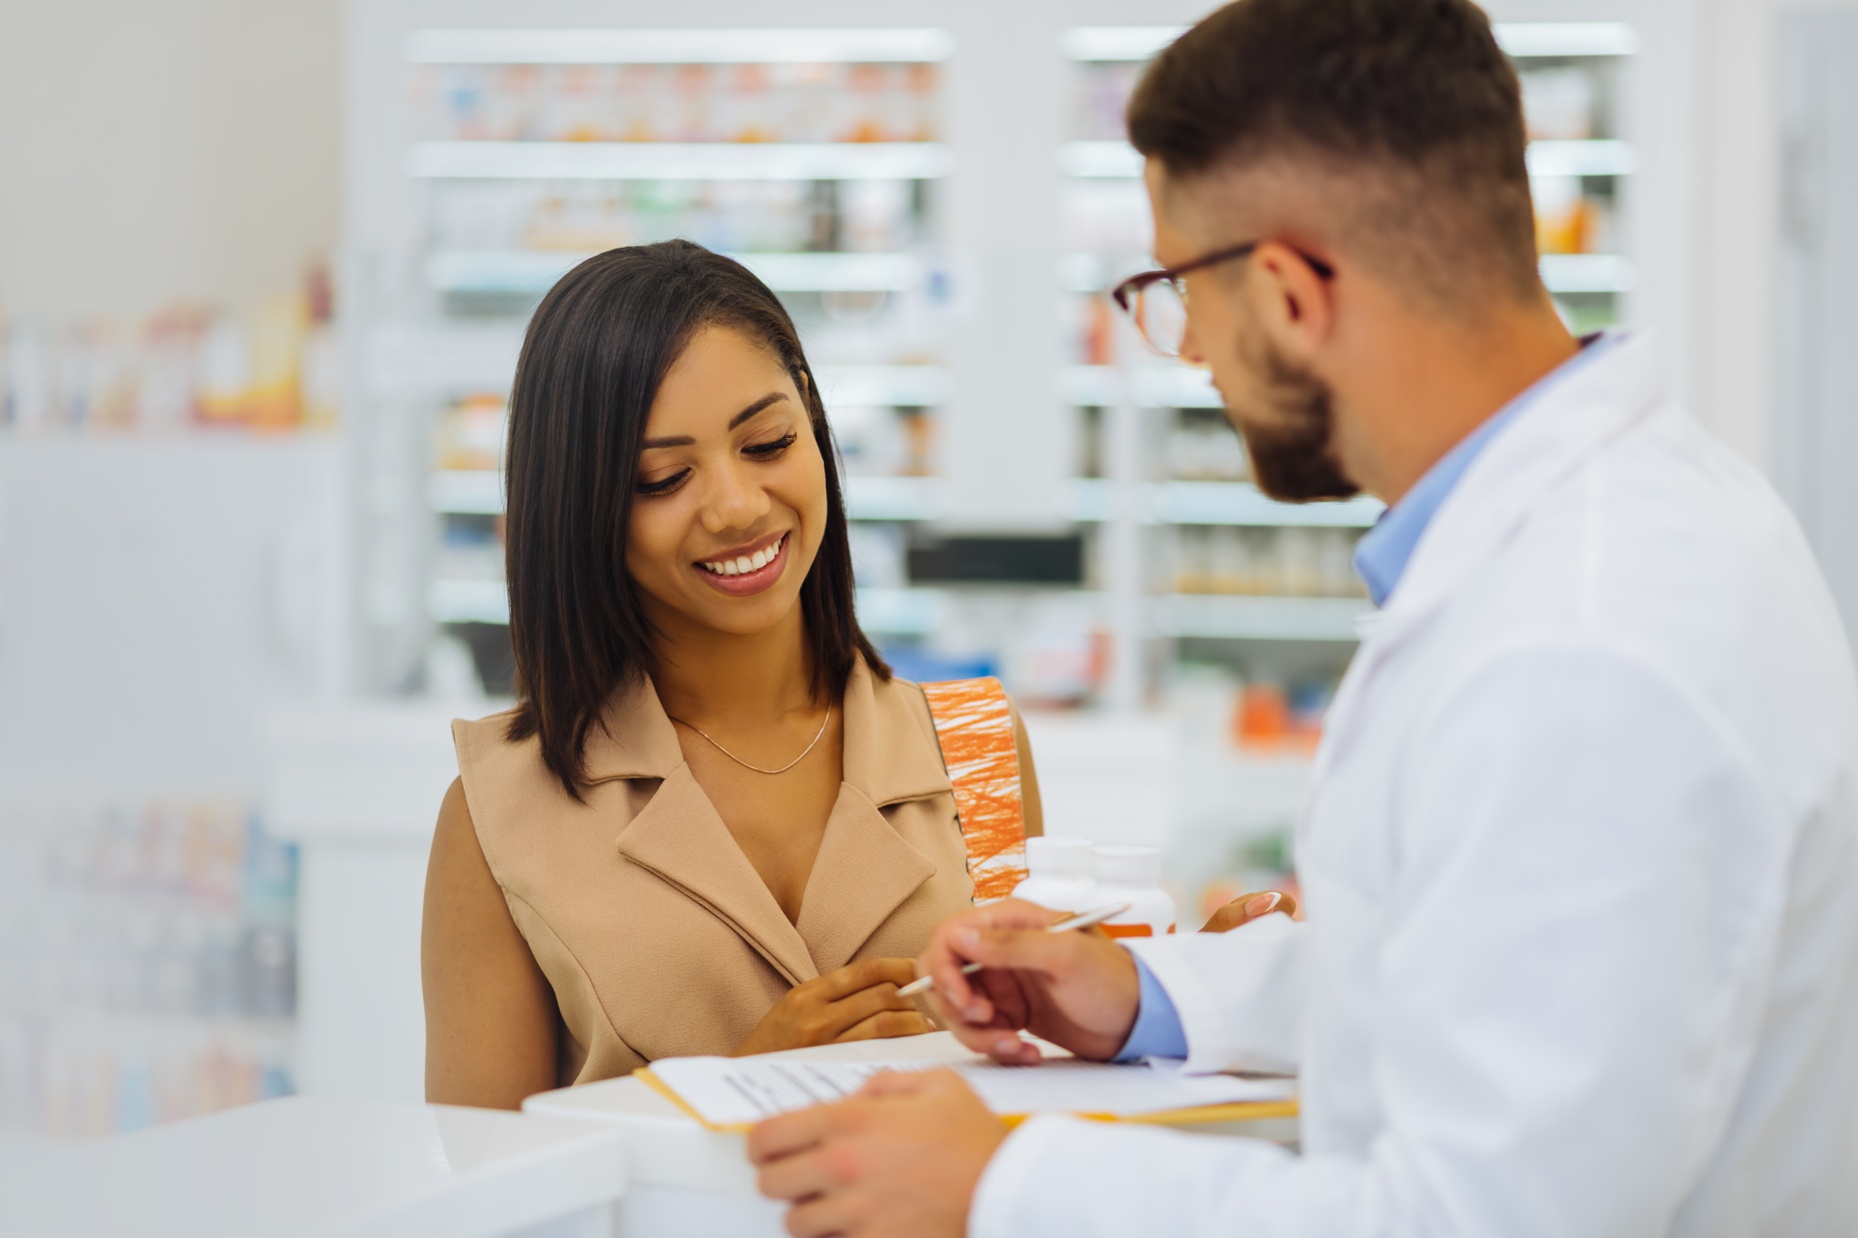 prescribing pharmacist for common health issues